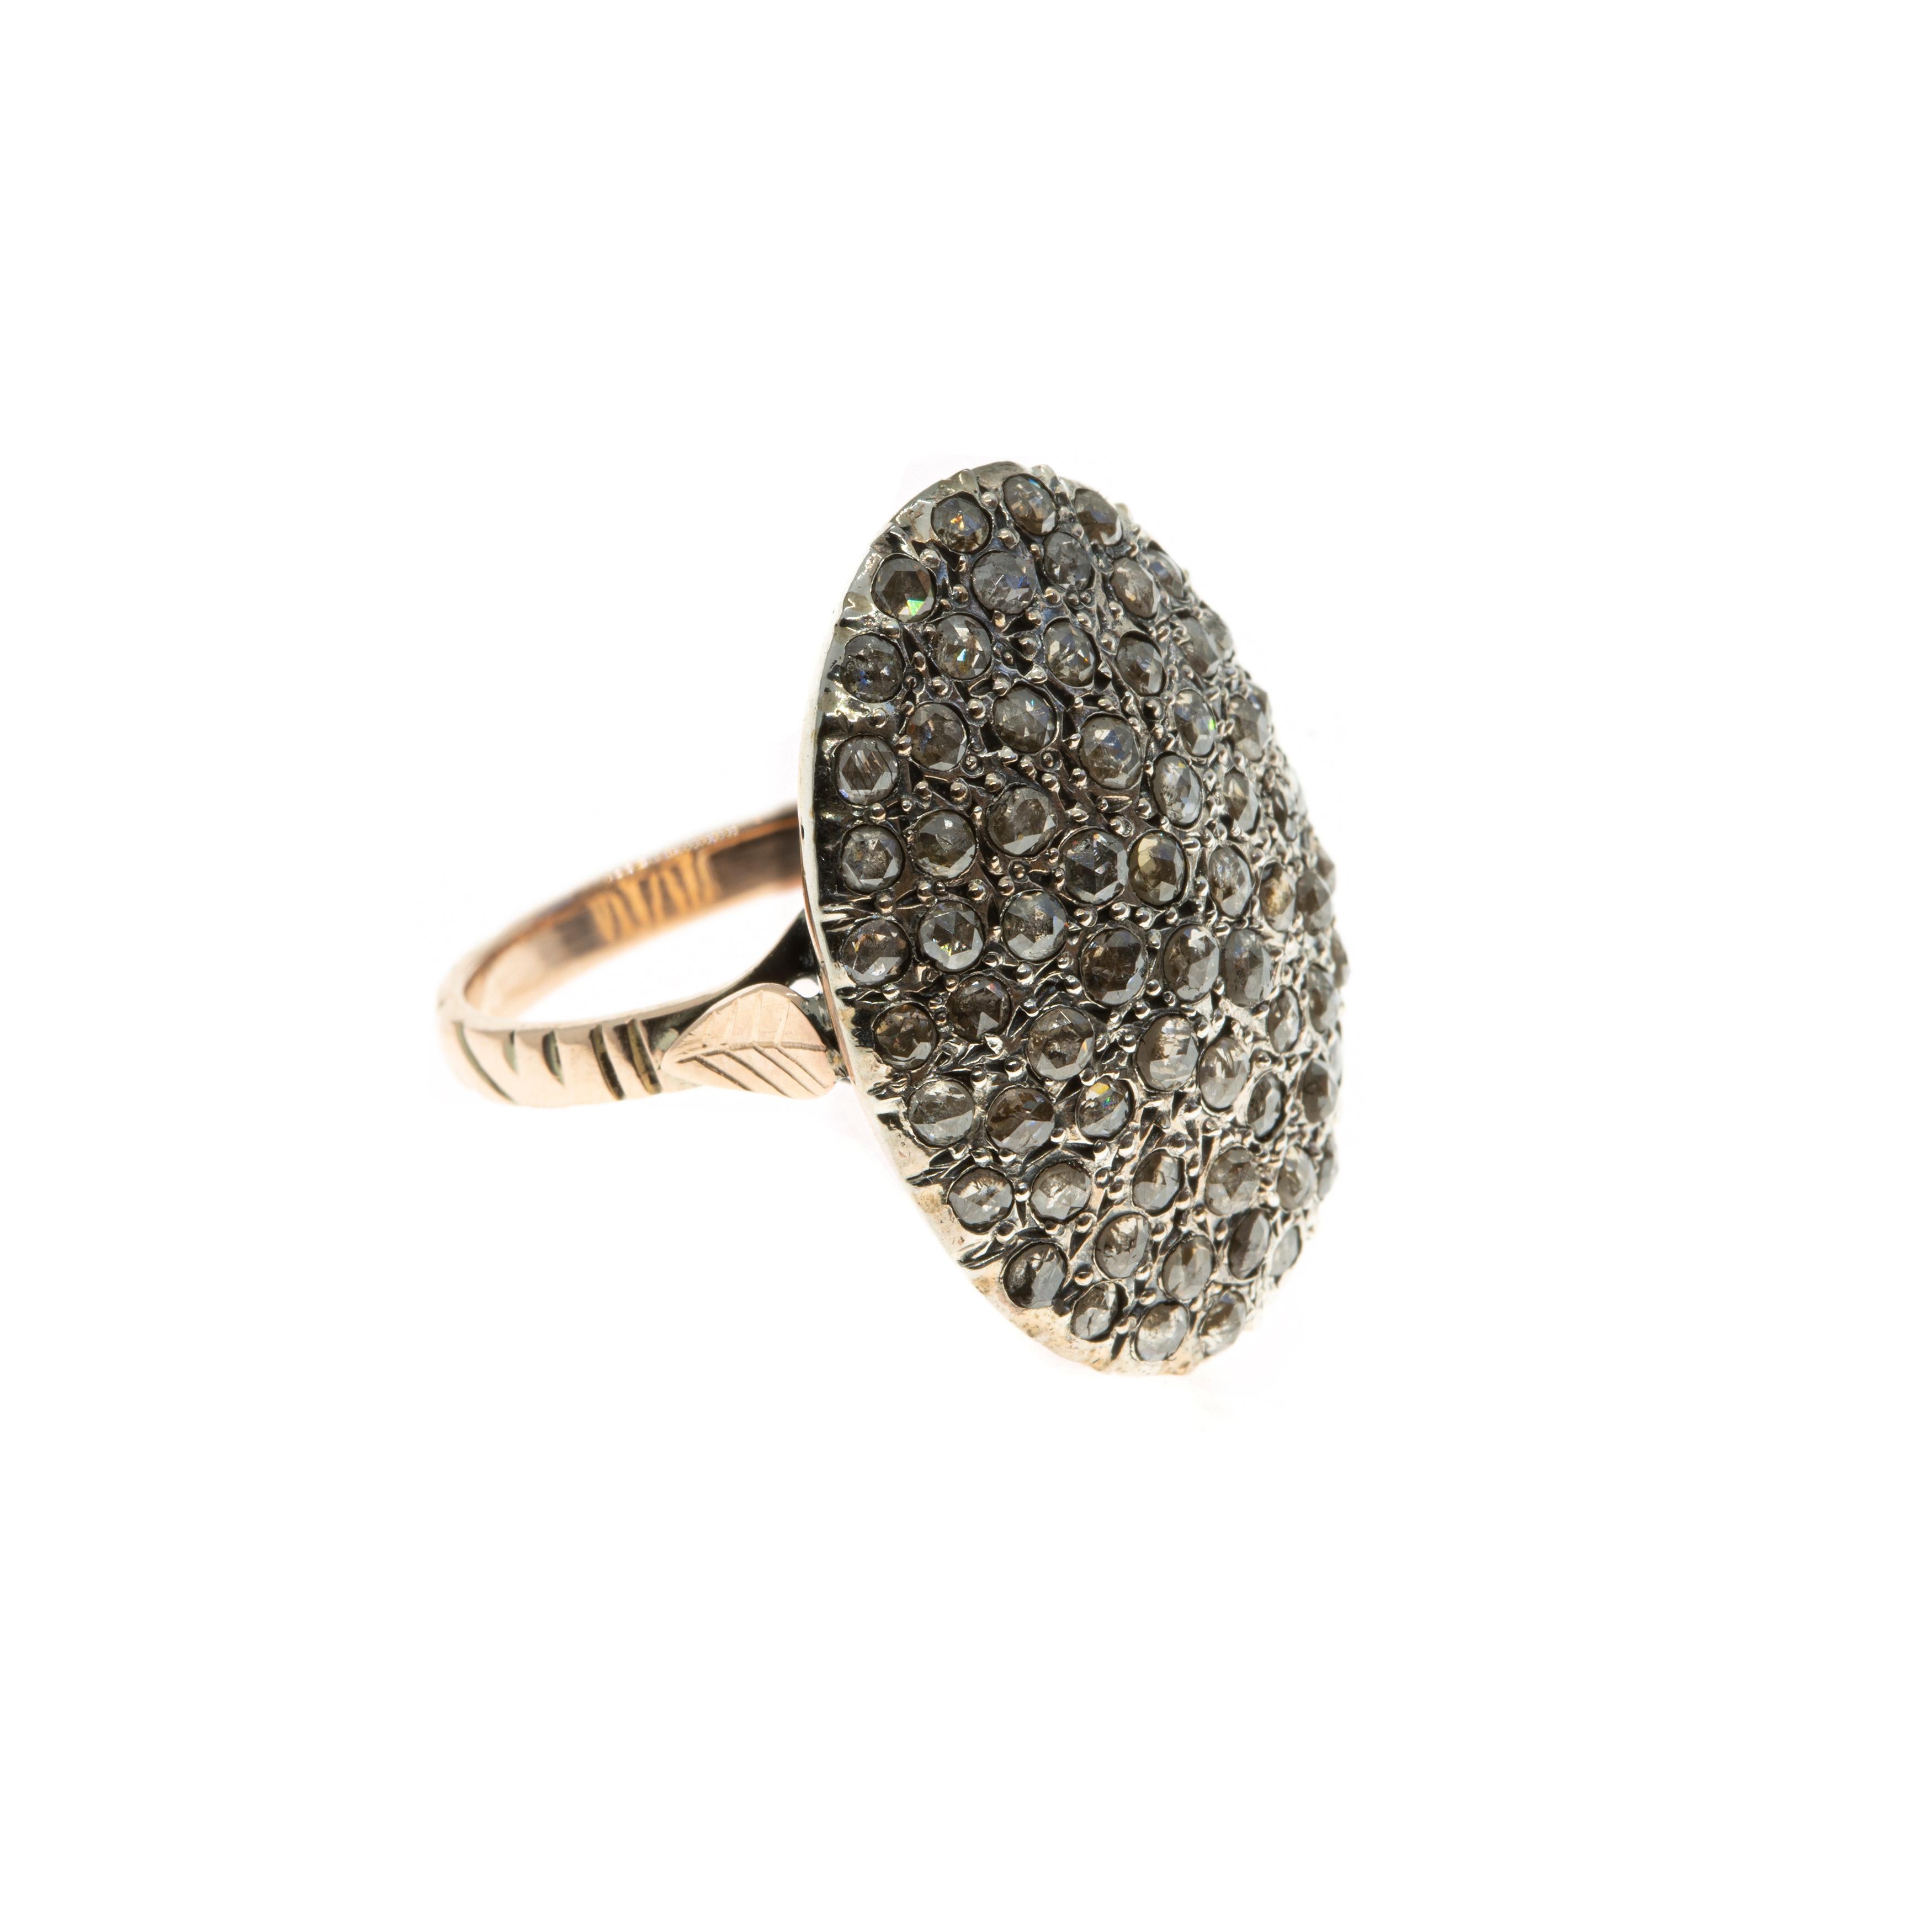 Contemporary 21st Century 9 Karat Rose Gold and Diamond Oval Cesellato Cocktail Ring For Sale